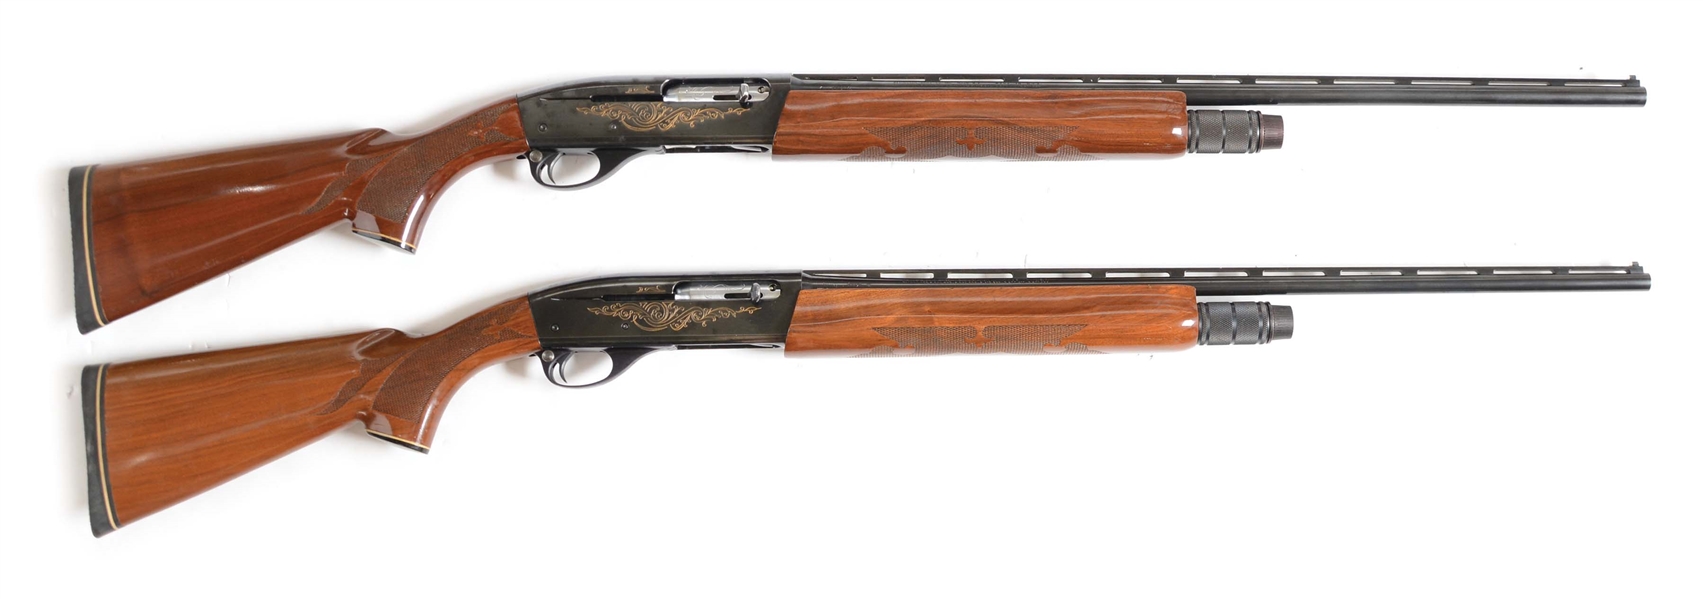 (M) REMINGTON MODEL 1100 "MATCHED PAIR" NUMBER 859 - A 28 BORE AND 410 BORE.